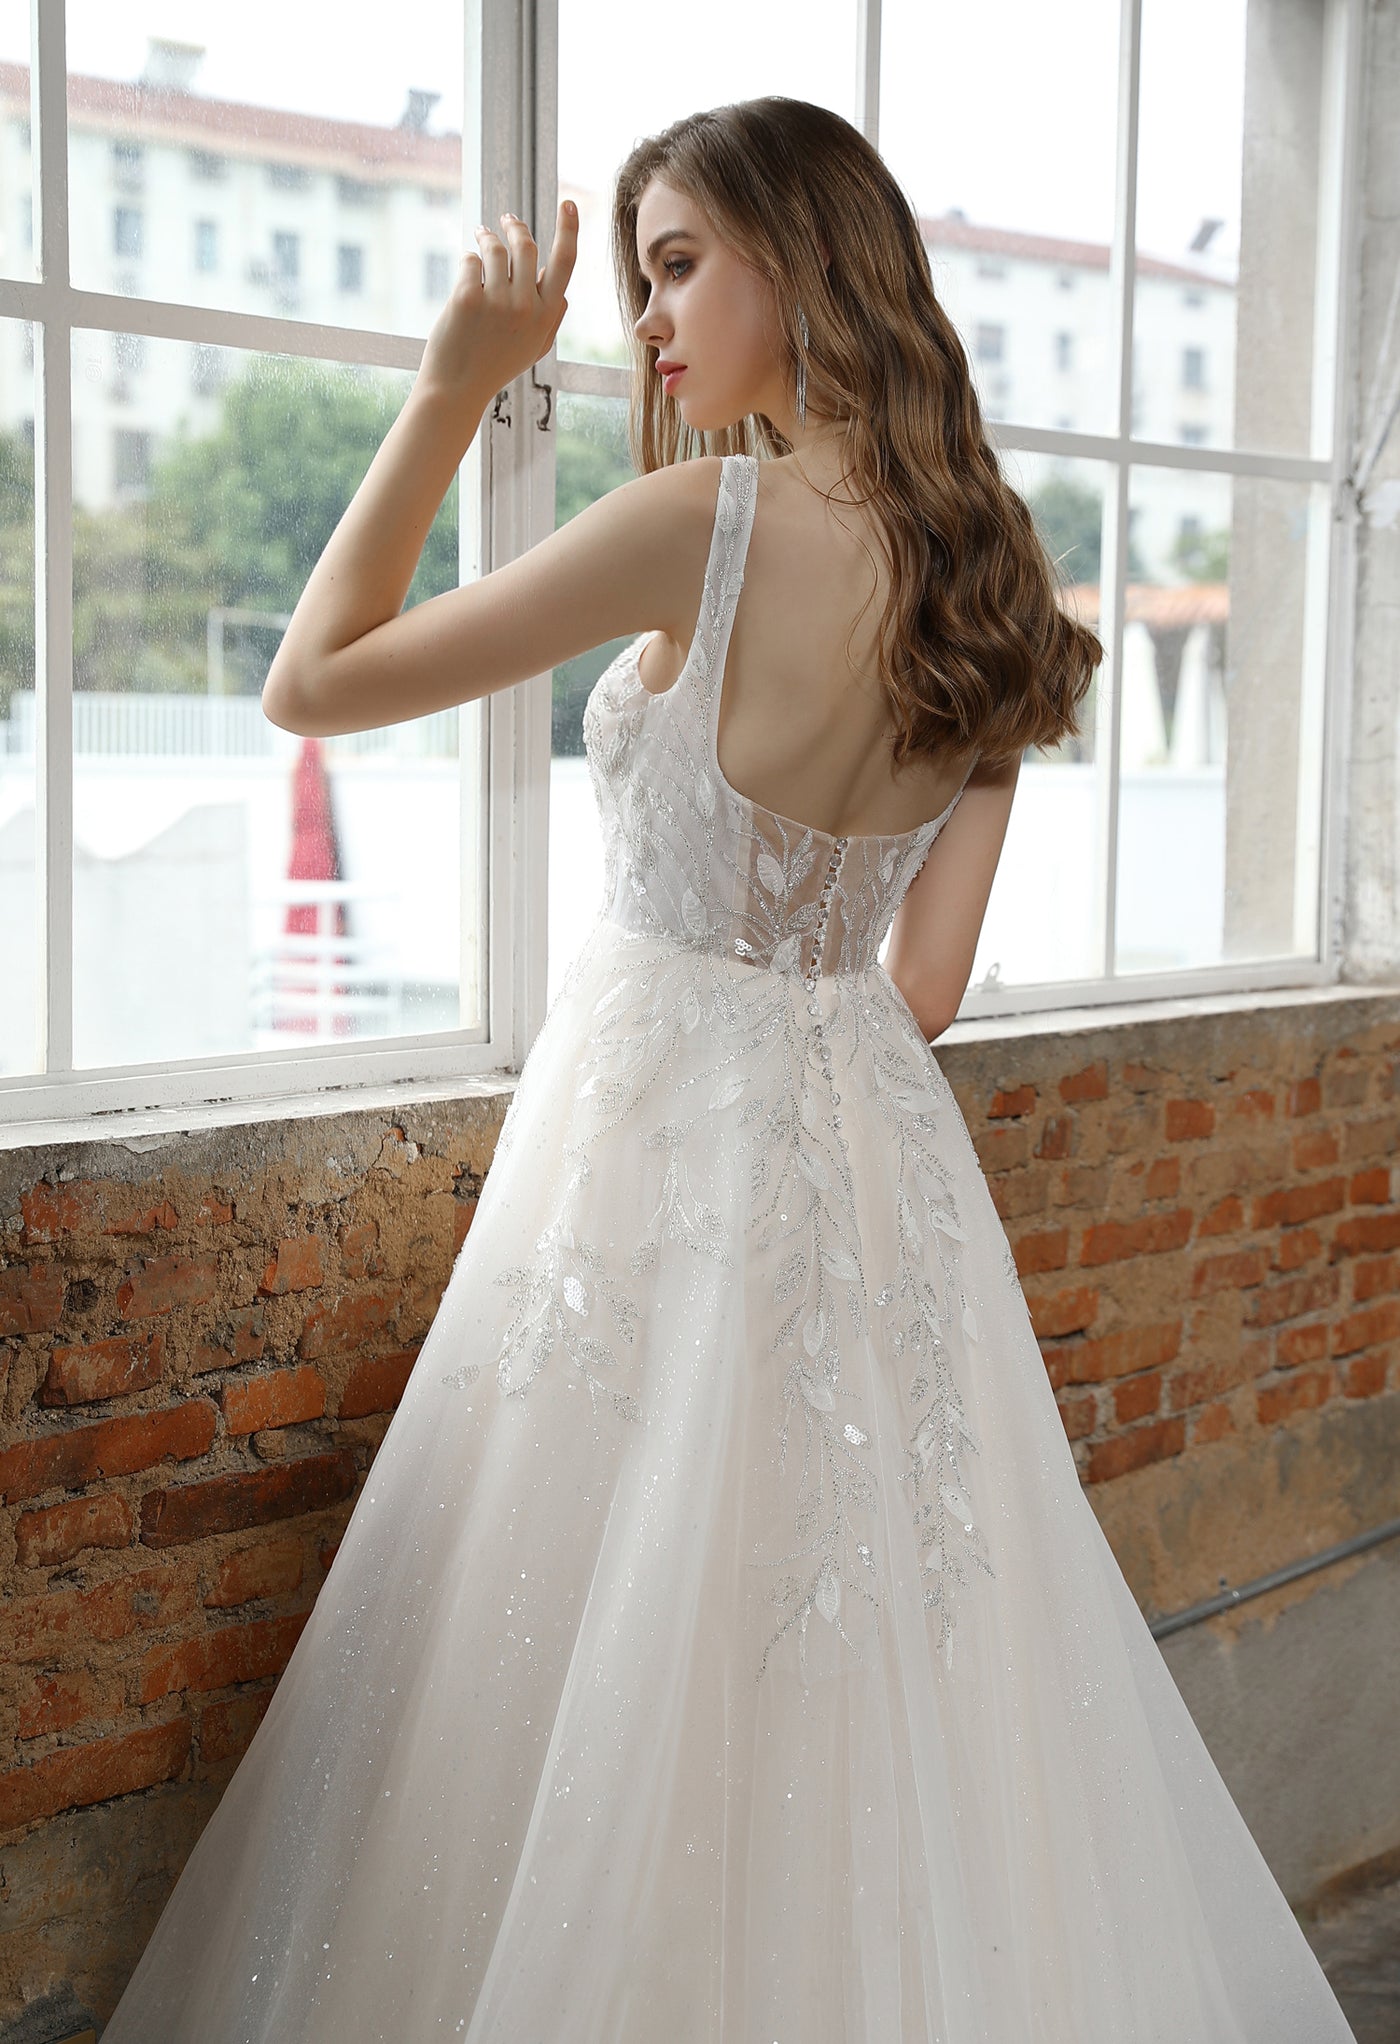 A woman in a Bergamot Bridal Square Neckline Wedding Dress with Delicate Leafy Lace looking out of a window in London.